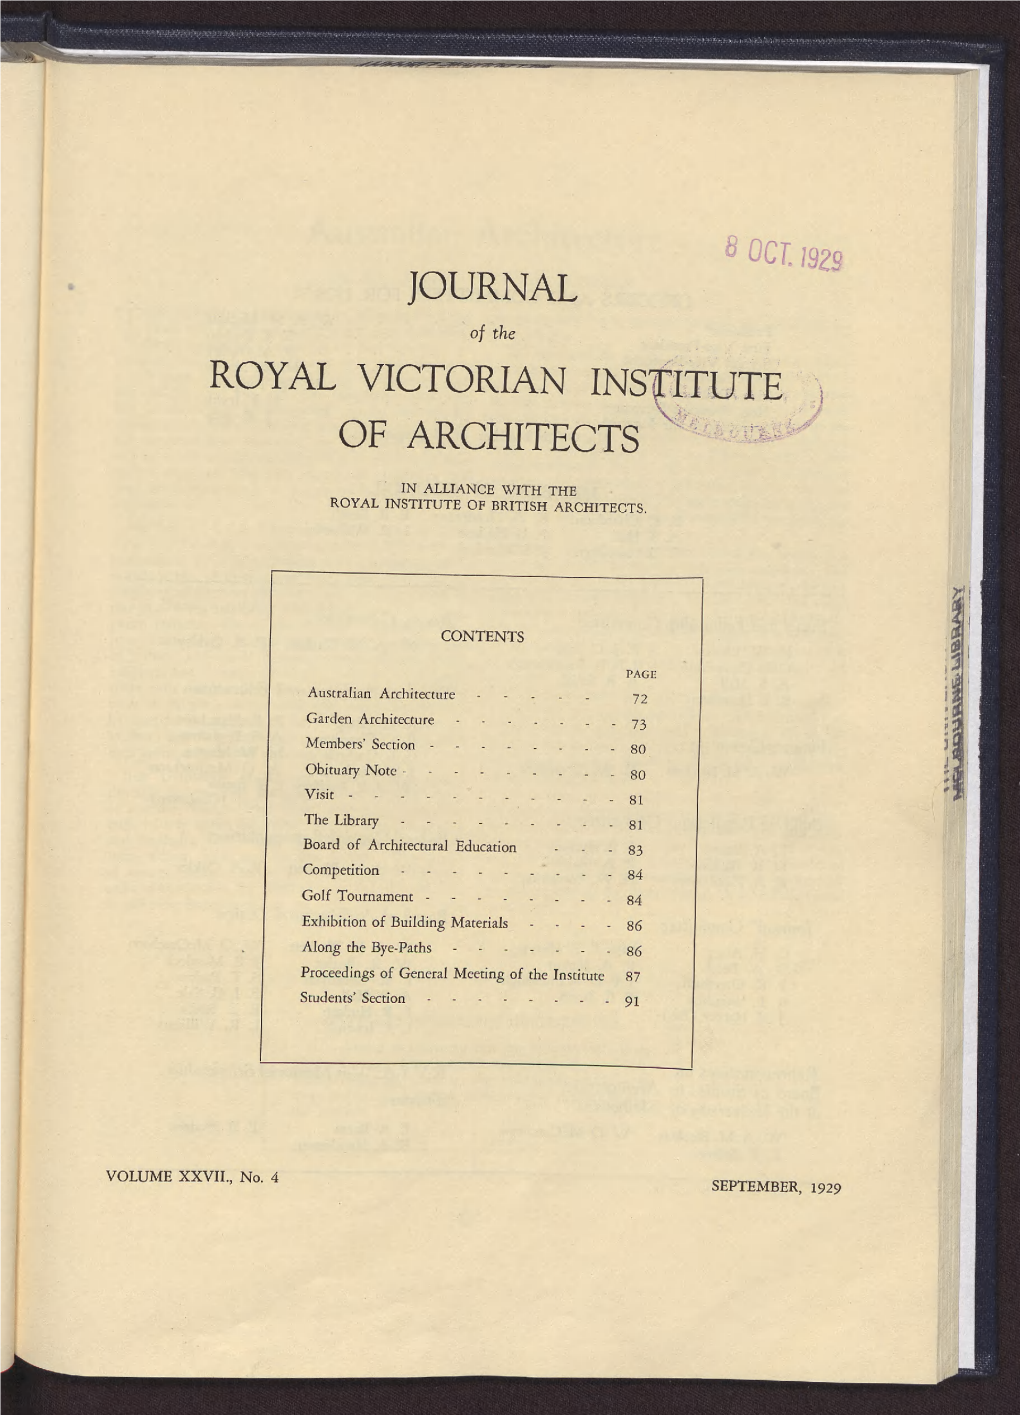 JOURNAL of the ROYAL VICTORIAN INSTITUTE of ARCHITECTS